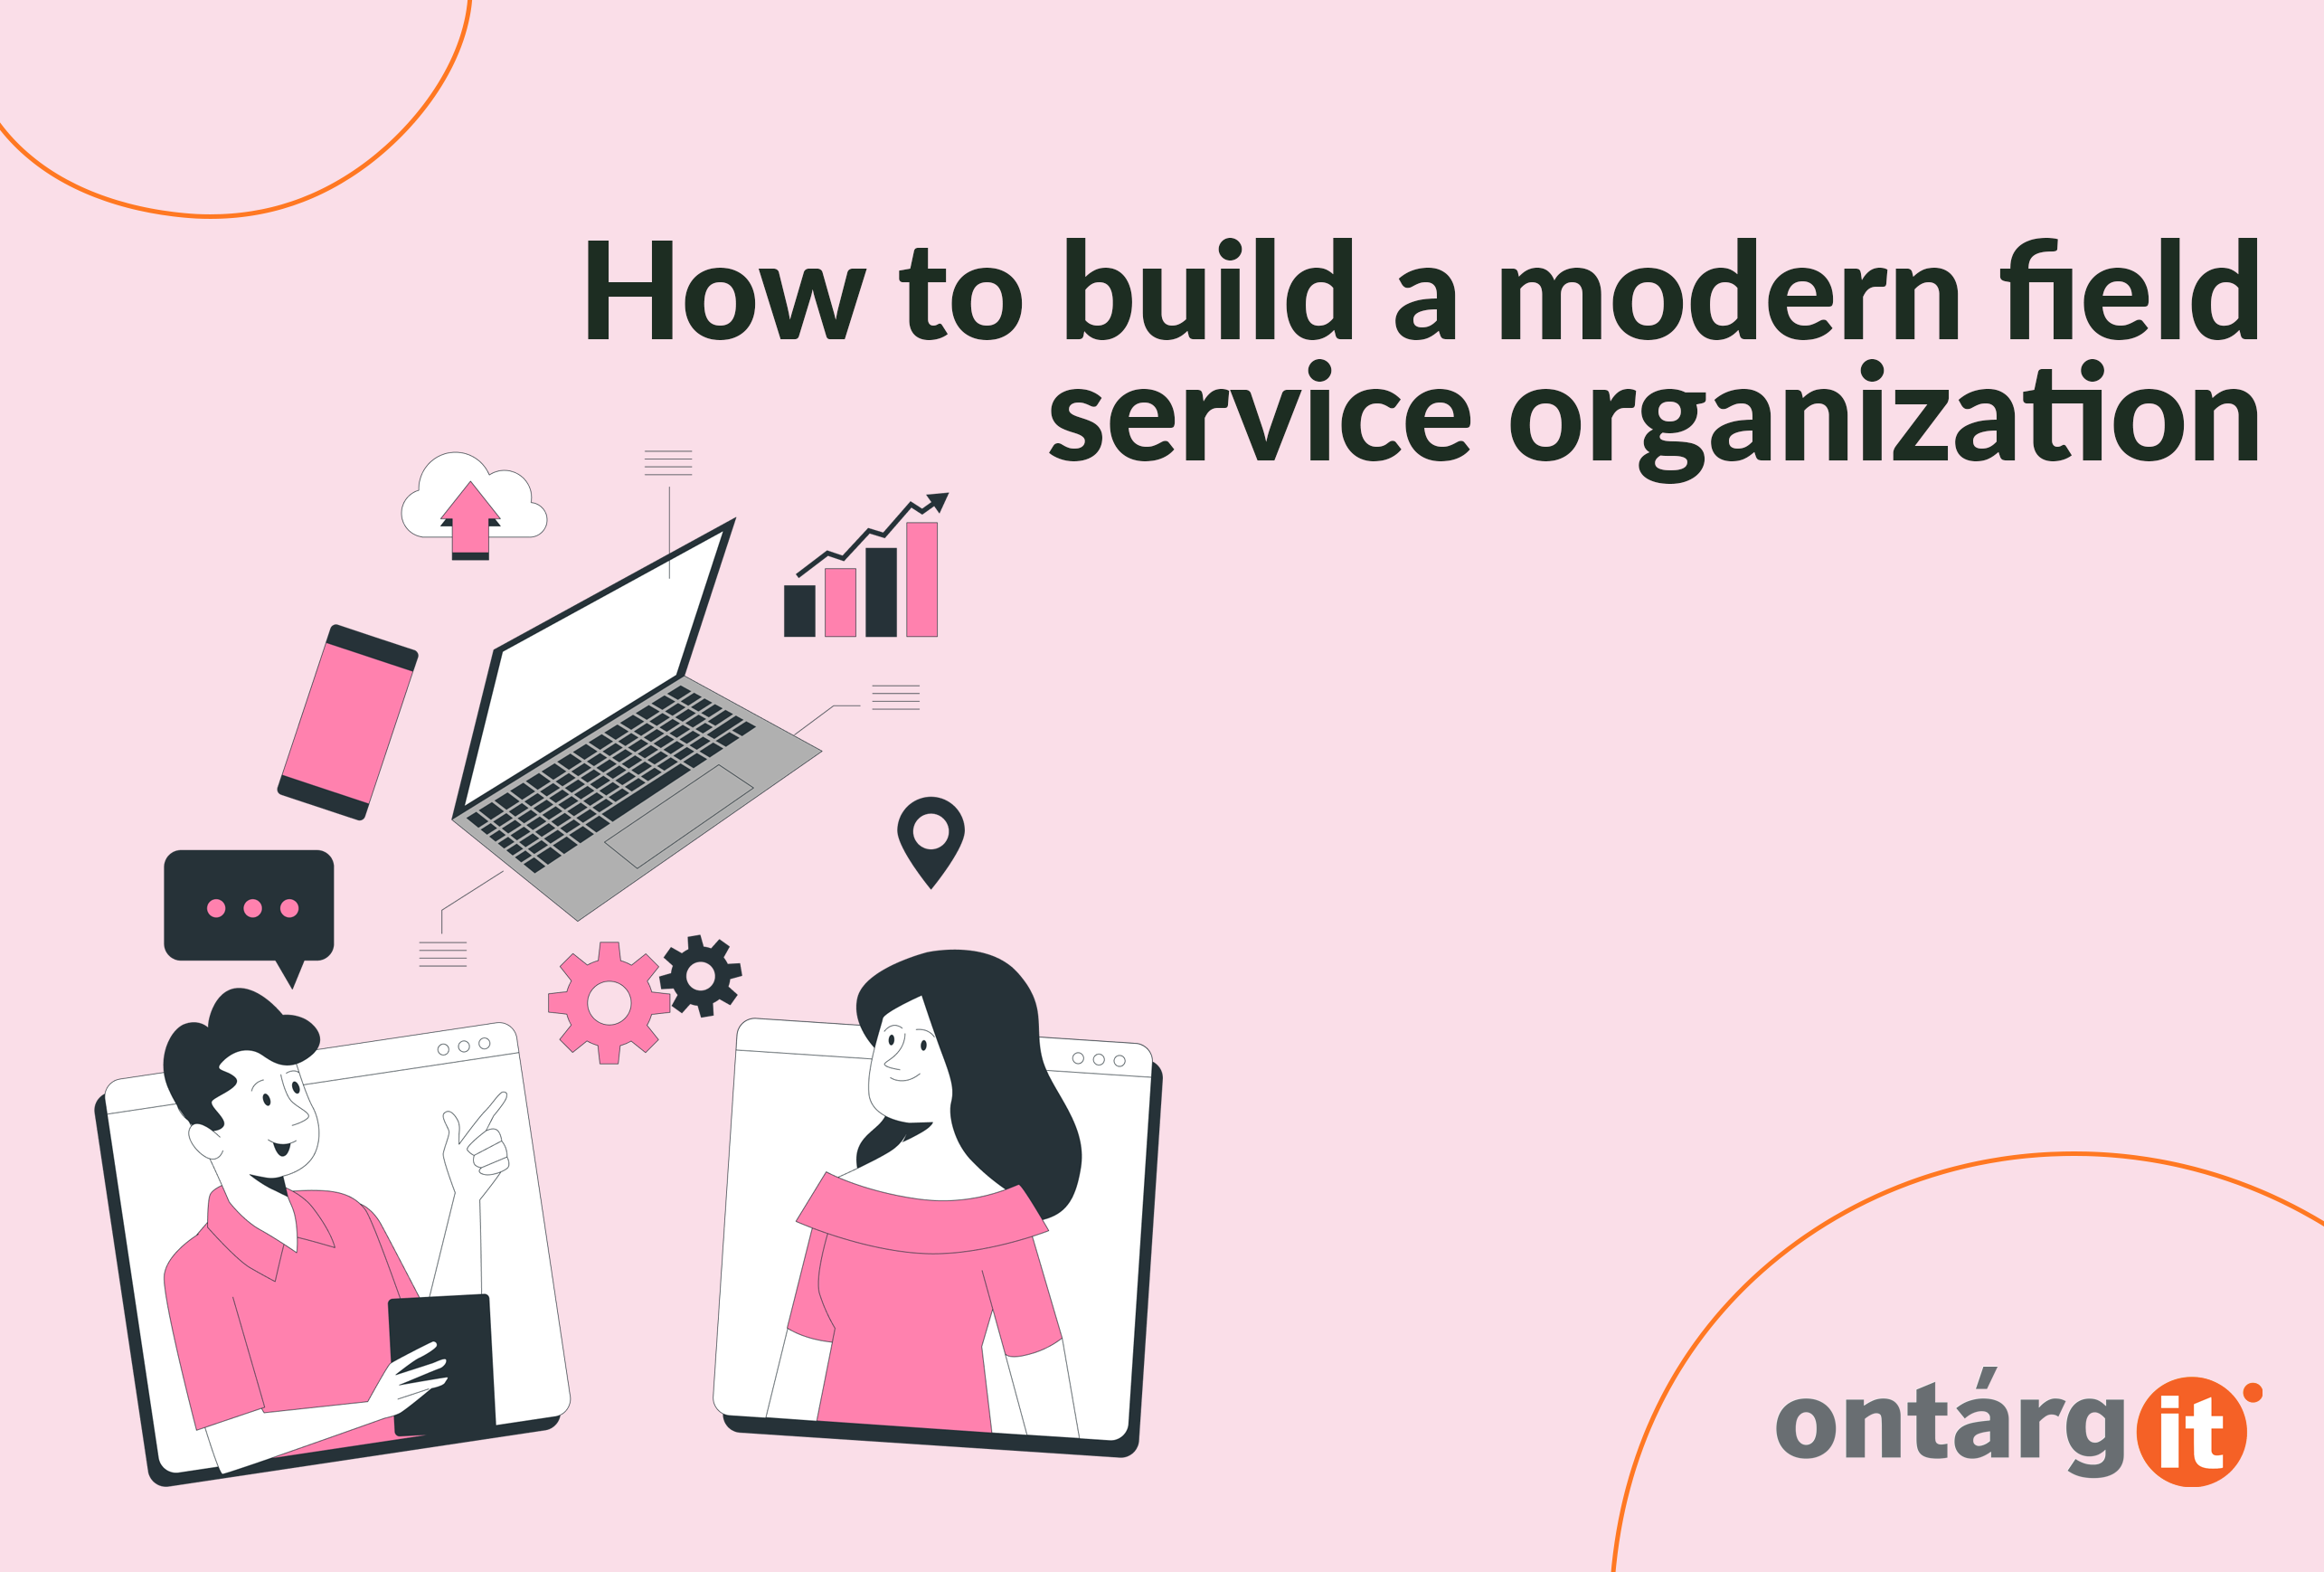 Field service organization critically need the ability to capture, digest, and derive actionable insights from data.